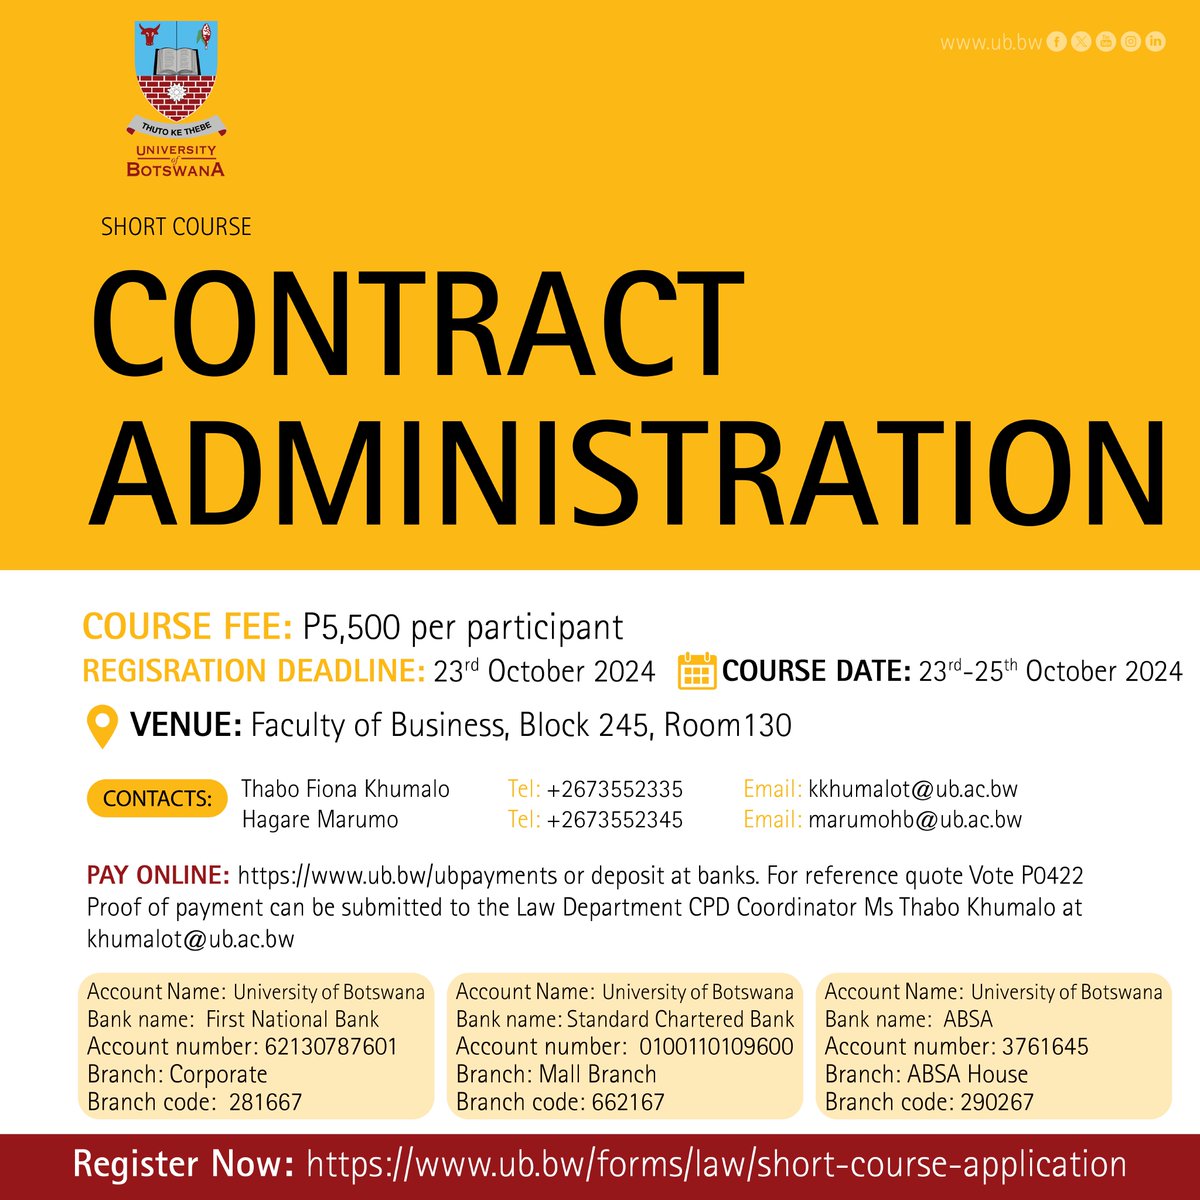 #ShortCourse
Contract Administration
Register Now: ub.bw/forms/law/shor…